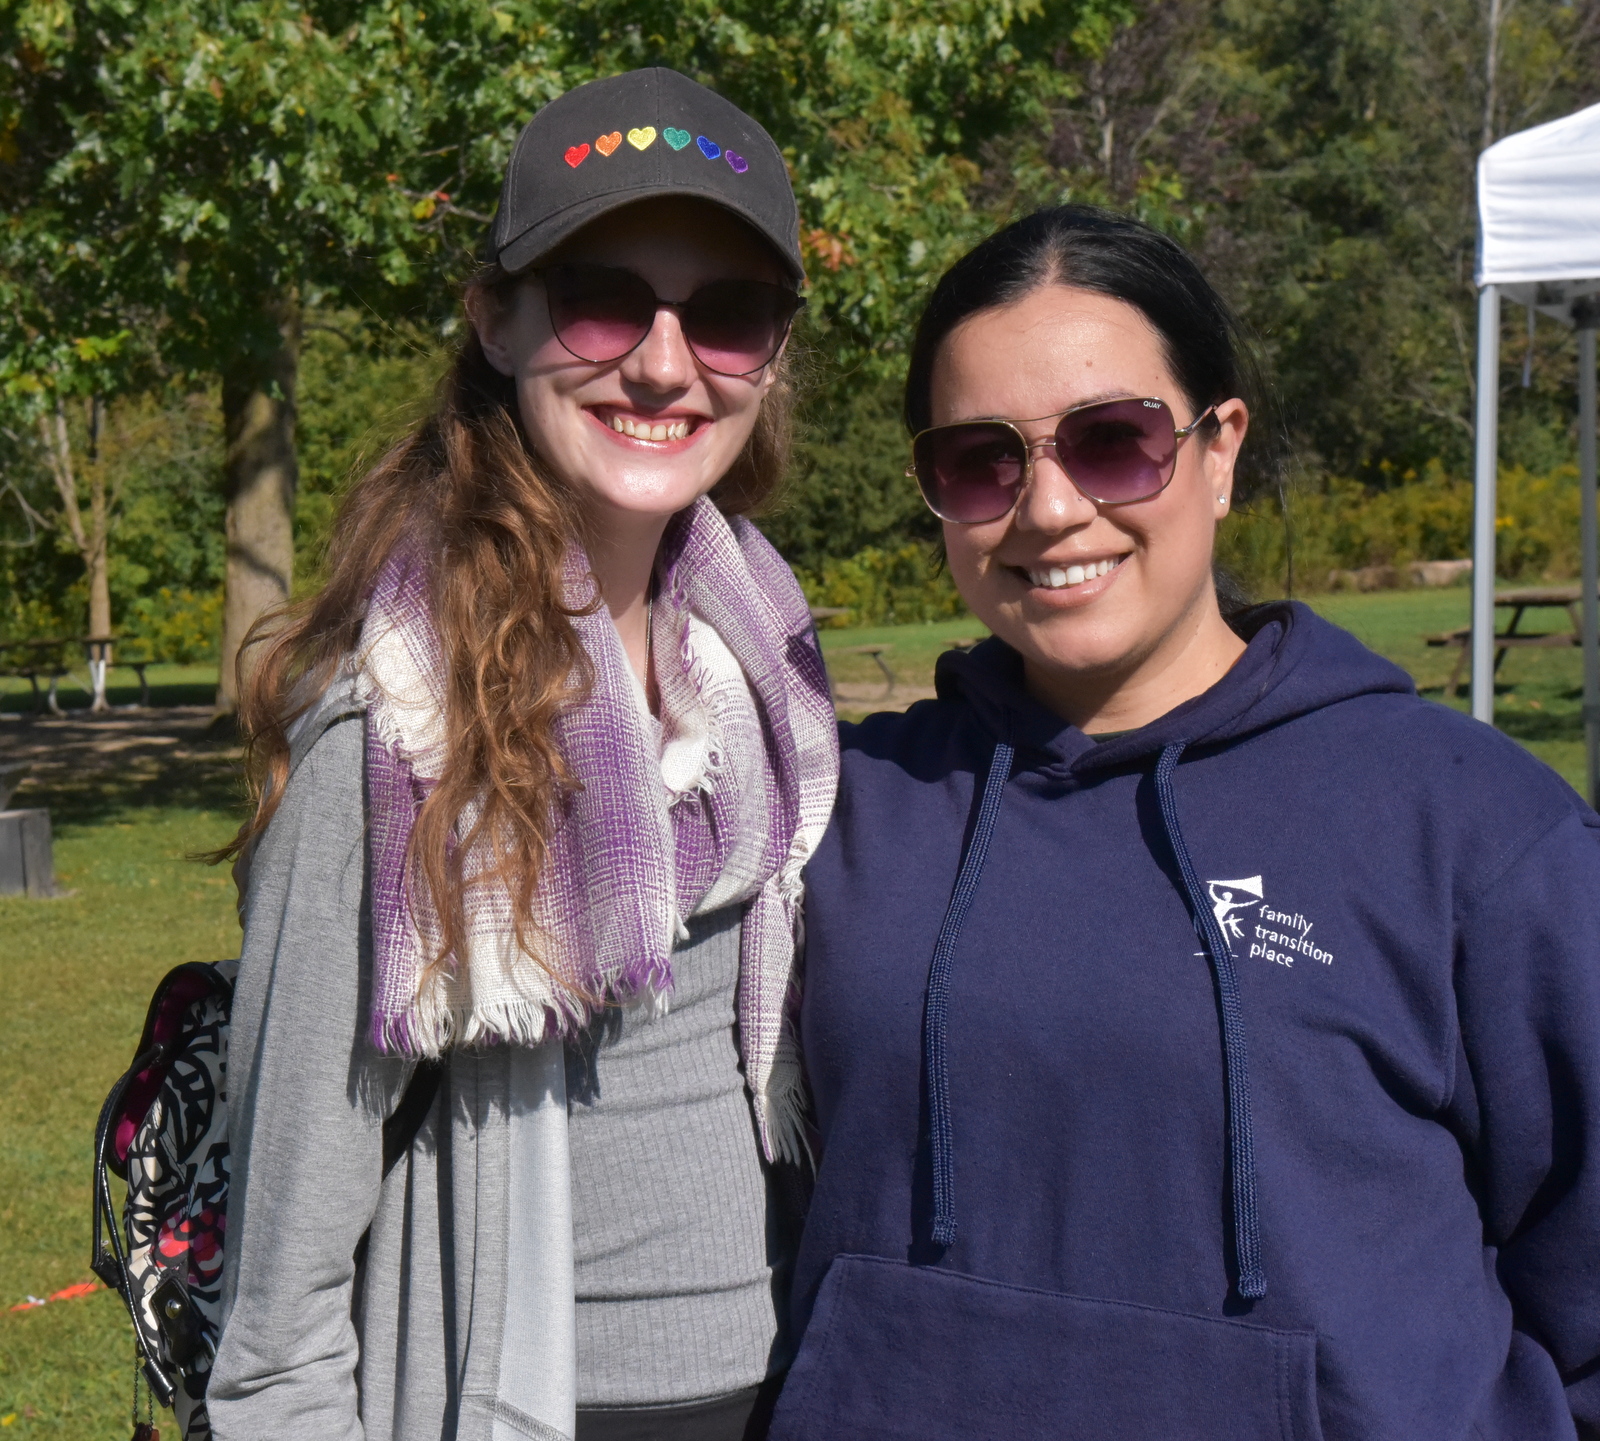 Laura and friend smiling at the camera enjoying the day at Heidi's Walk for Hope September 2023.